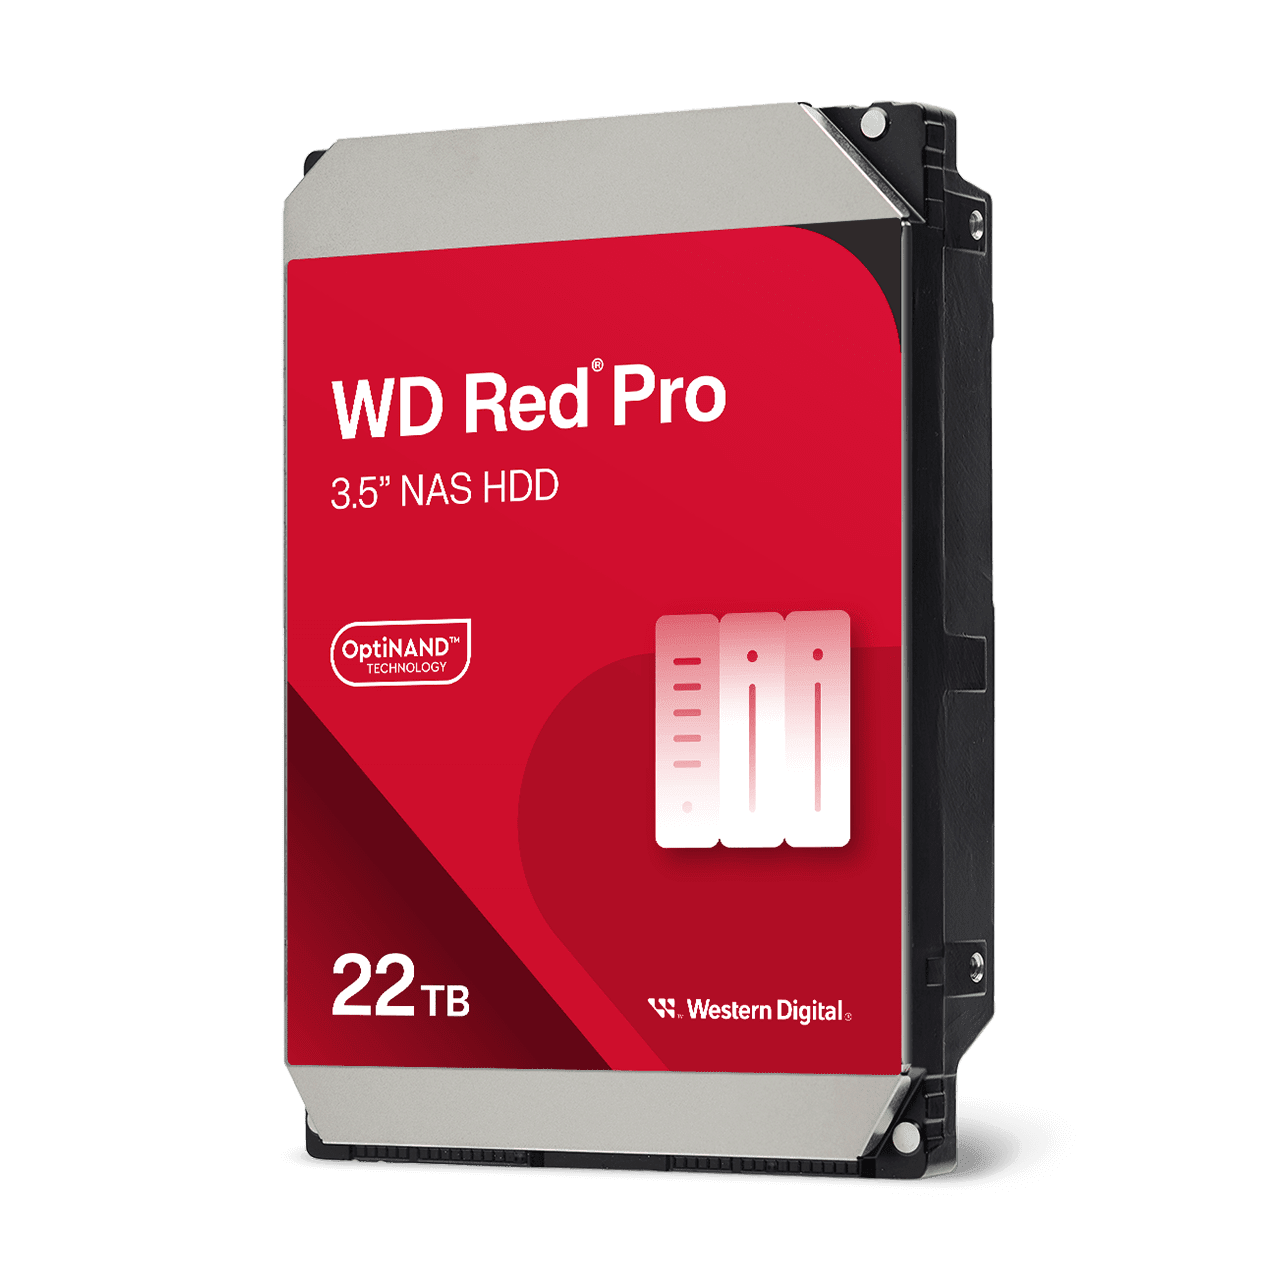 WD Red™ Pro 22TB NAS Hard Drive - Image11